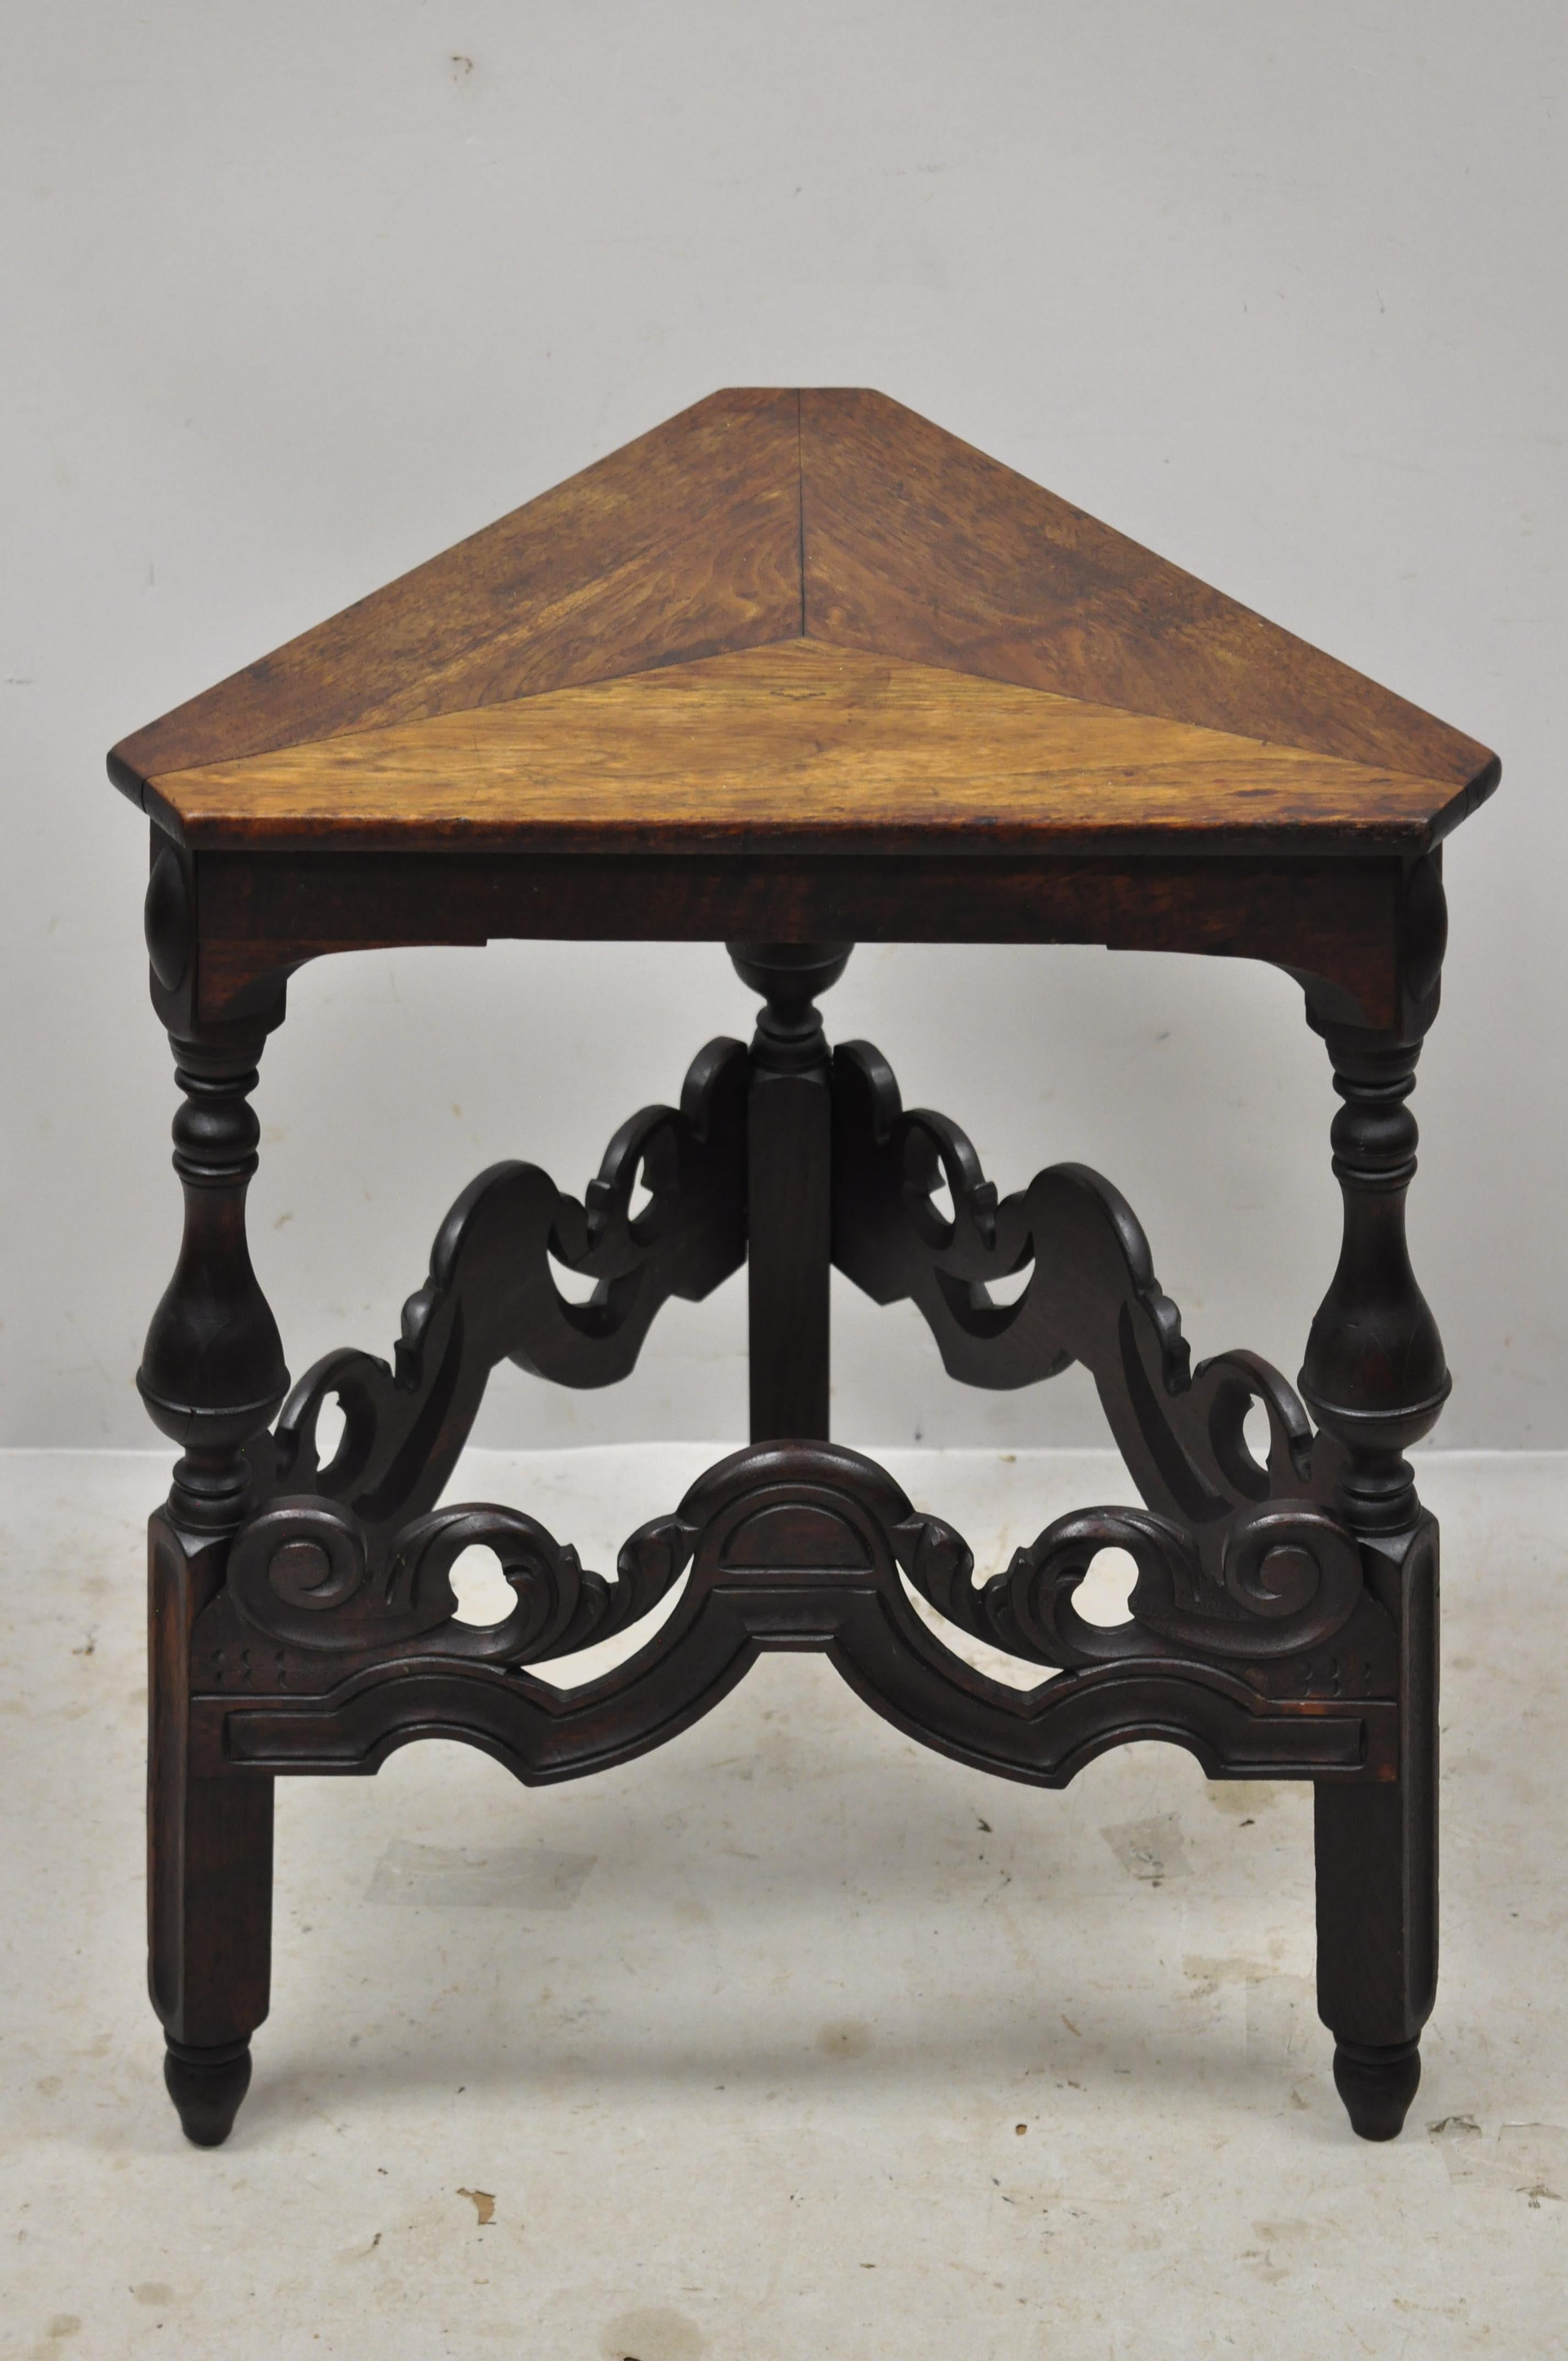 Kittinger buffalo Spanish Renaissance walnut triangle occasional side accent table. Item features beautiful wood grain, nicely carved details, original label, very nice antique item, great style and form. circa early to mid 1900s. Measurements: